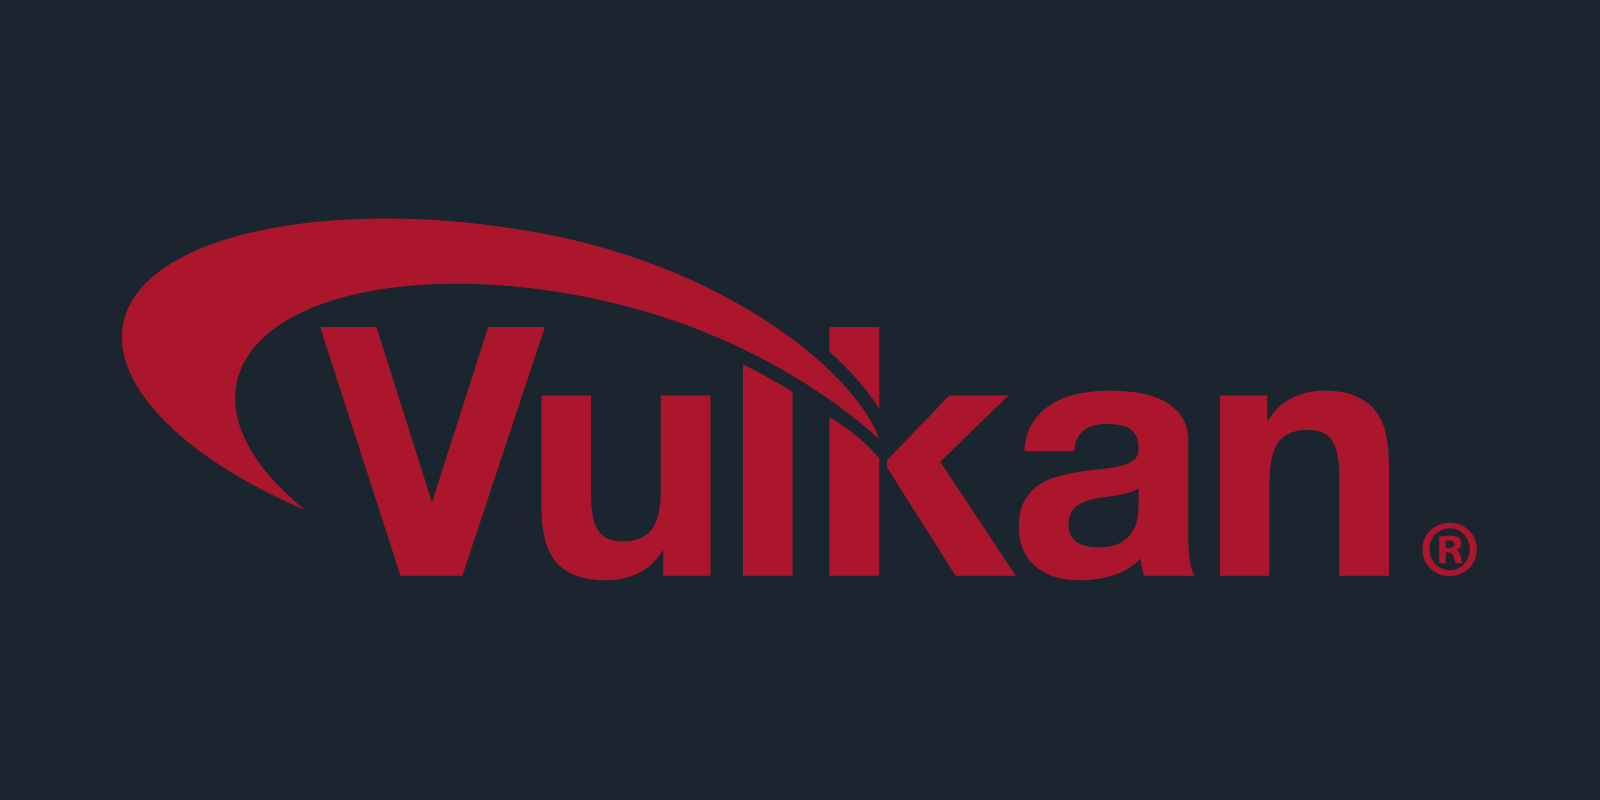 Download Vulkan-1.dll File and Fix the Code Execution Cannot Proceed Error